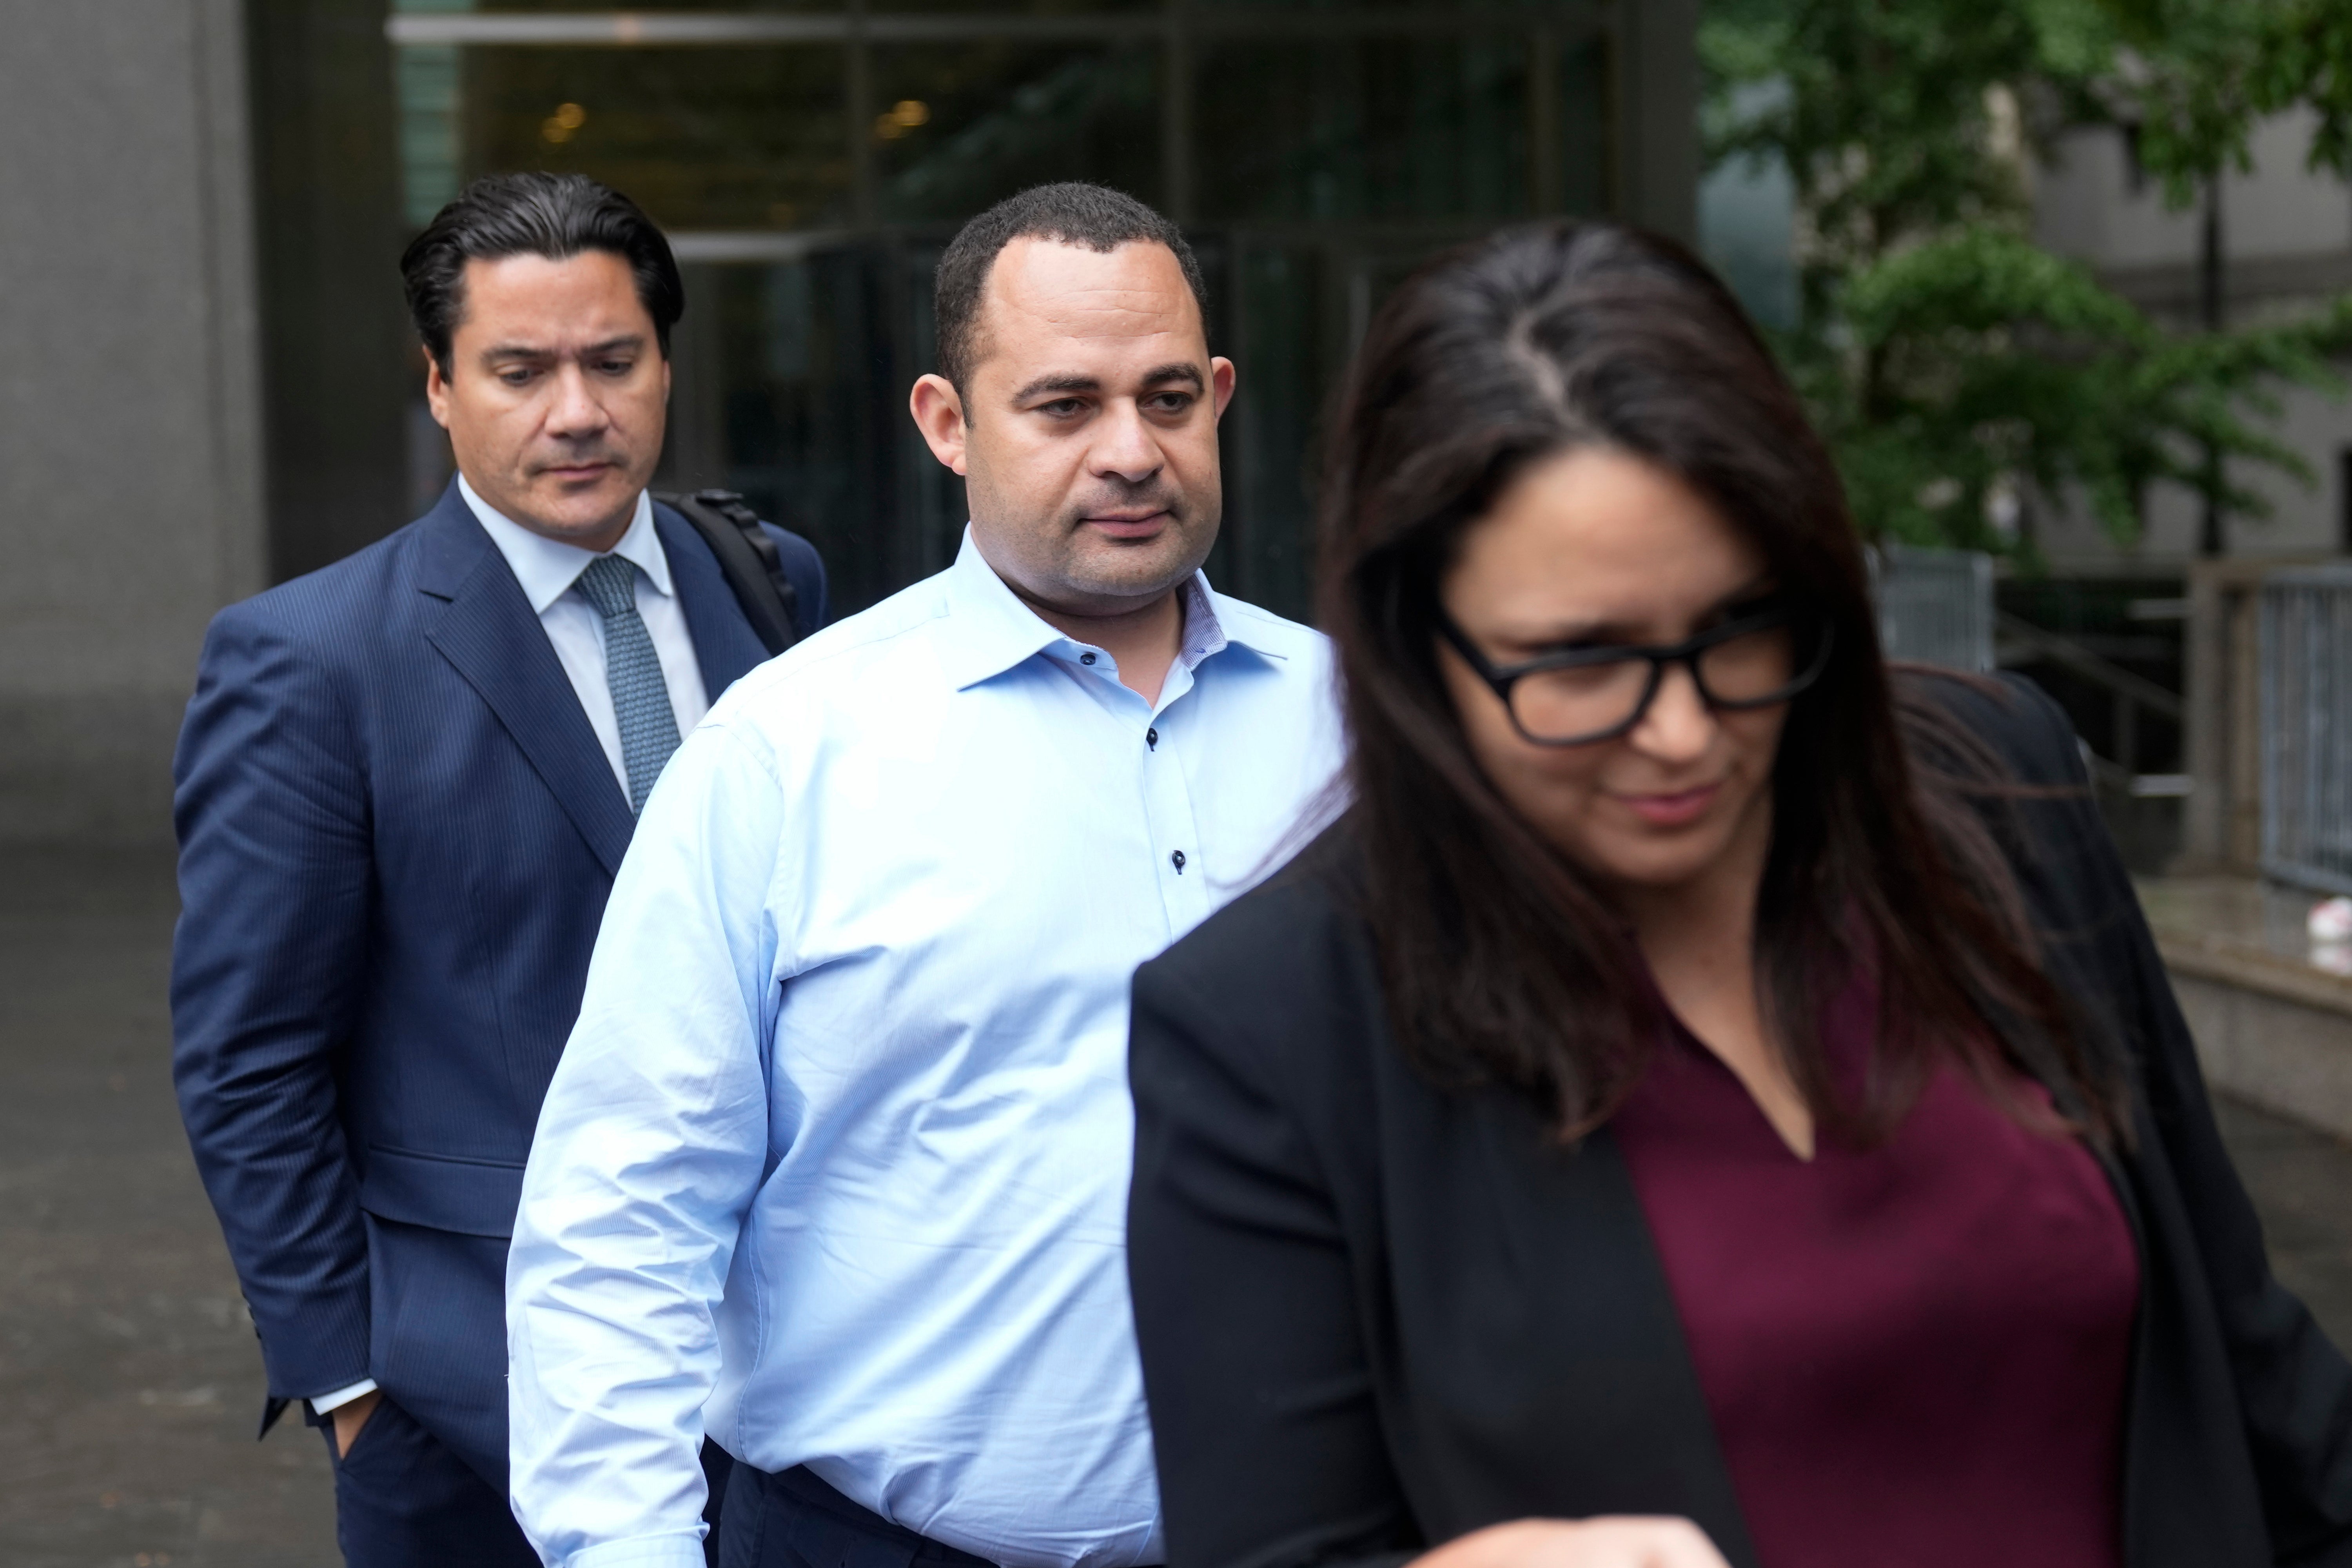 Wael Hana leaves federal courthouse in New York after arraignment